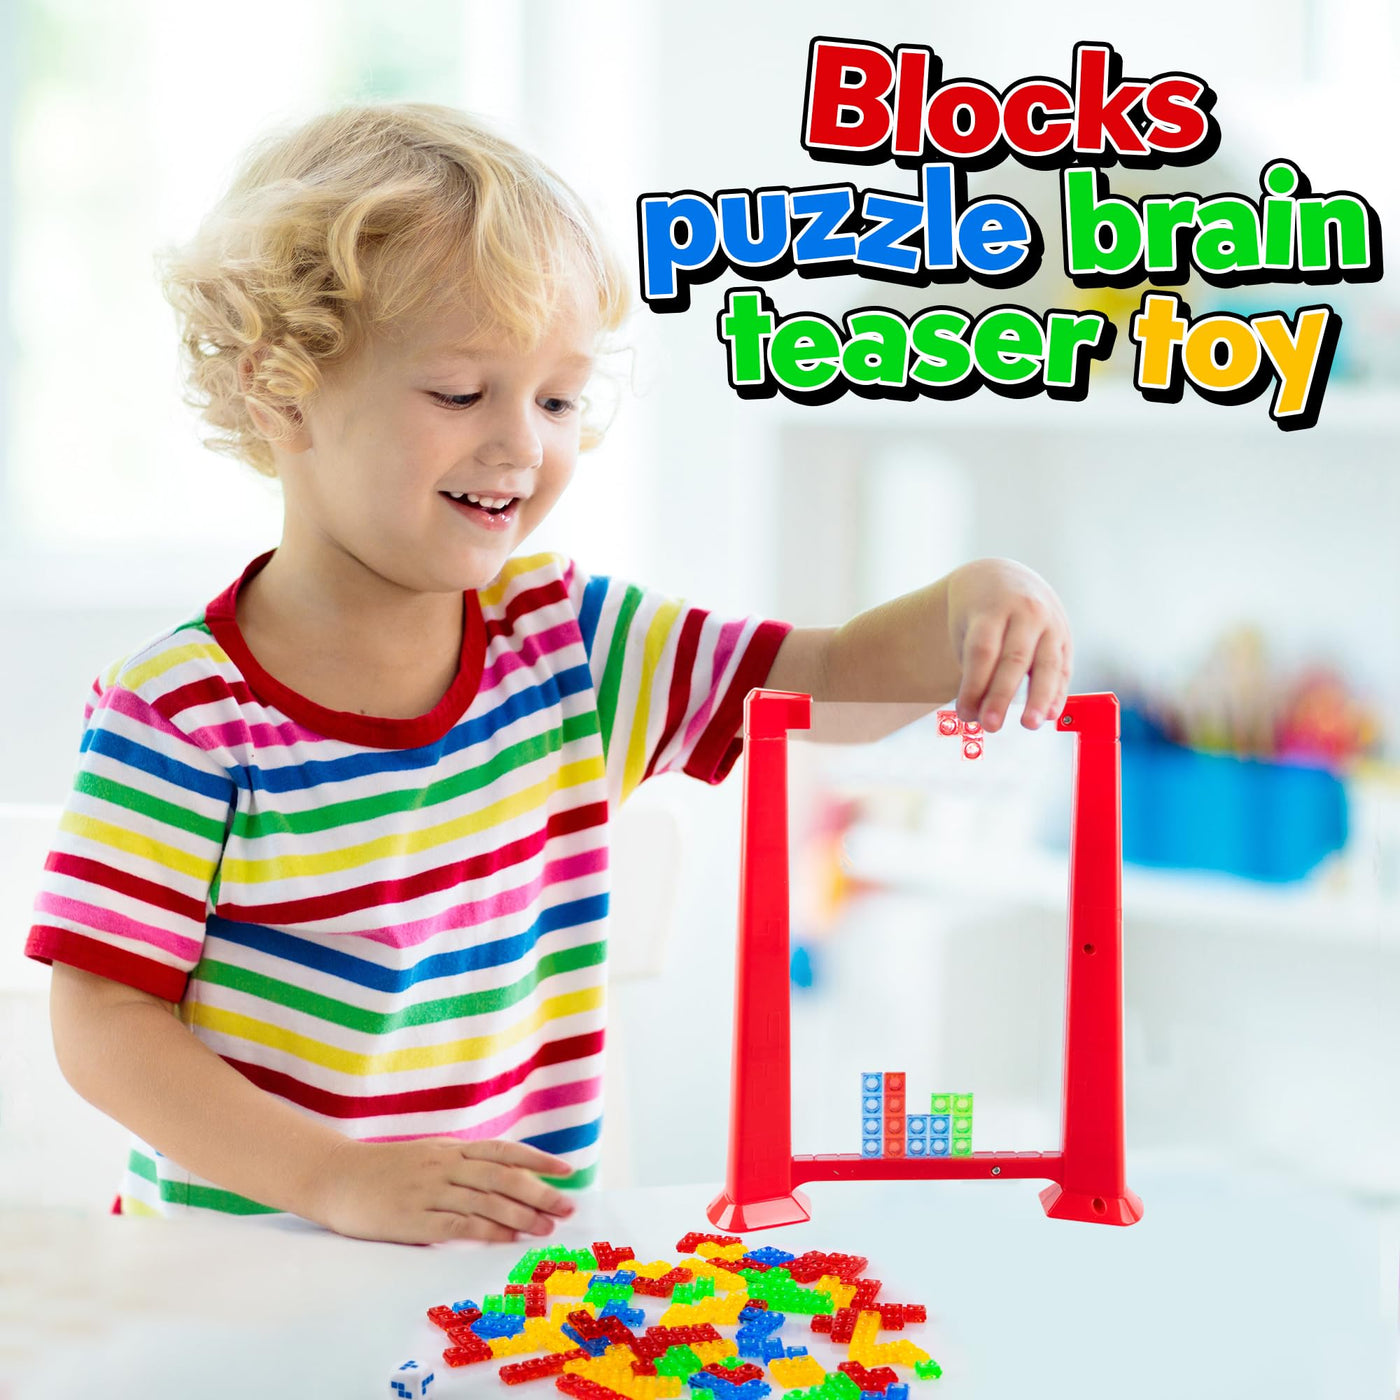 Falling Blocks Game - 3D Puzzles for Kids and Adults with 50 Game Pieces, Game Board, and Drawstring Bag - Ages 3 and Up